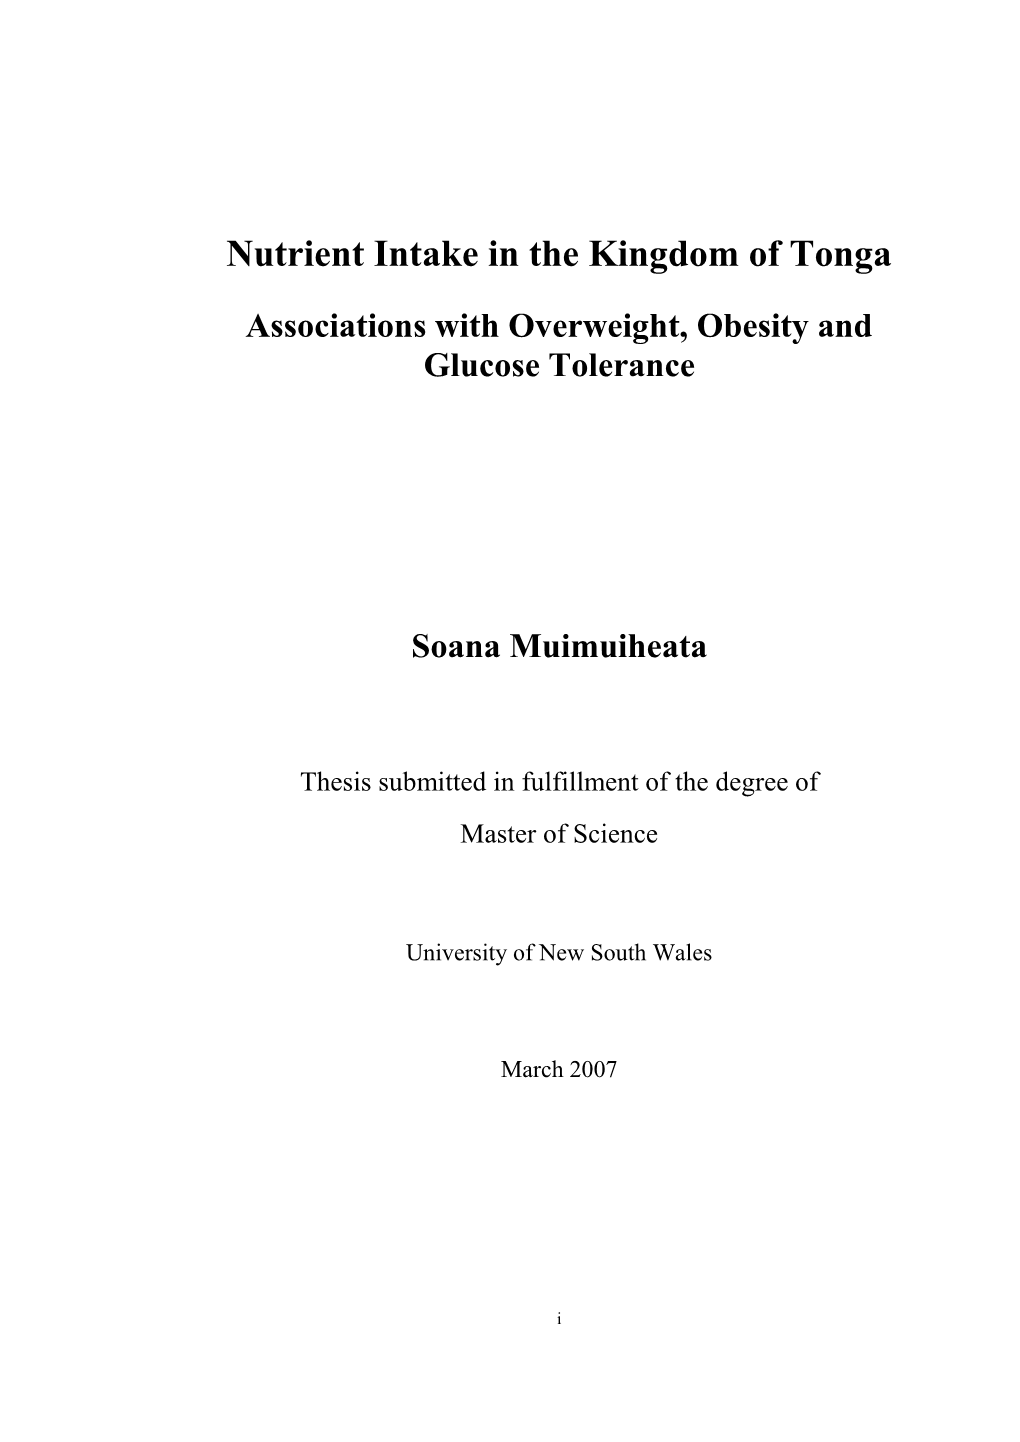 Nutrient Intake in the Kingdom of Tonga